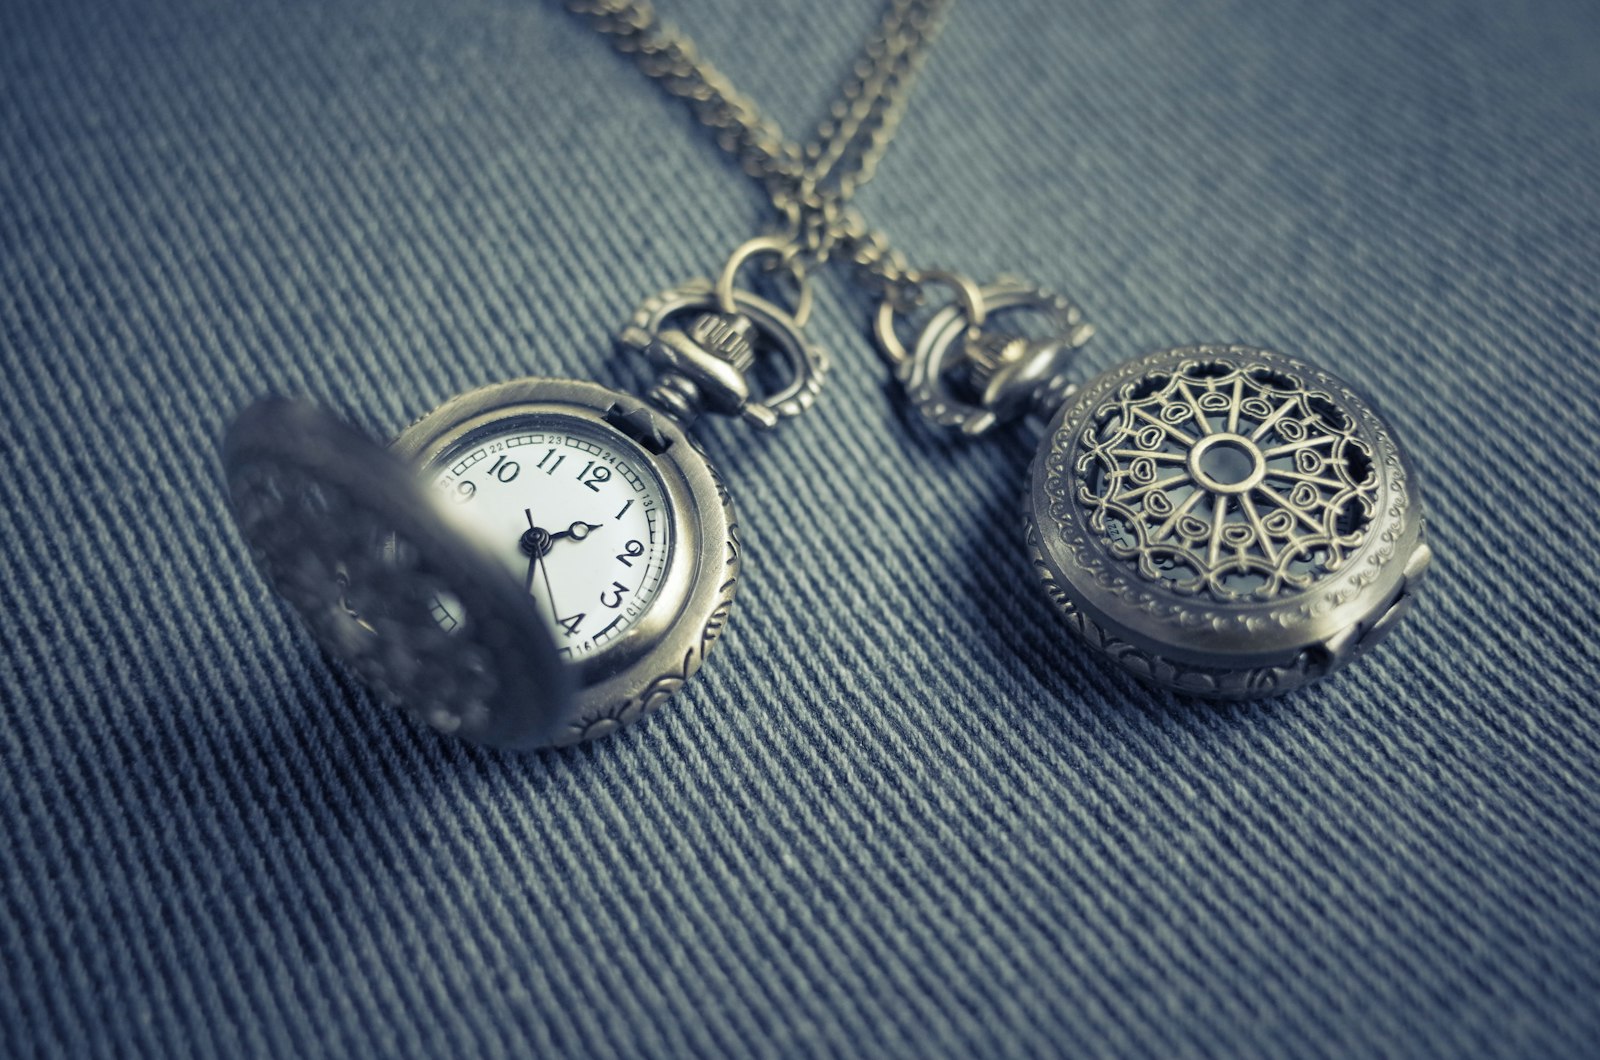 Ricoh GR sample photo. Silver-colored stopwatch pendant photography